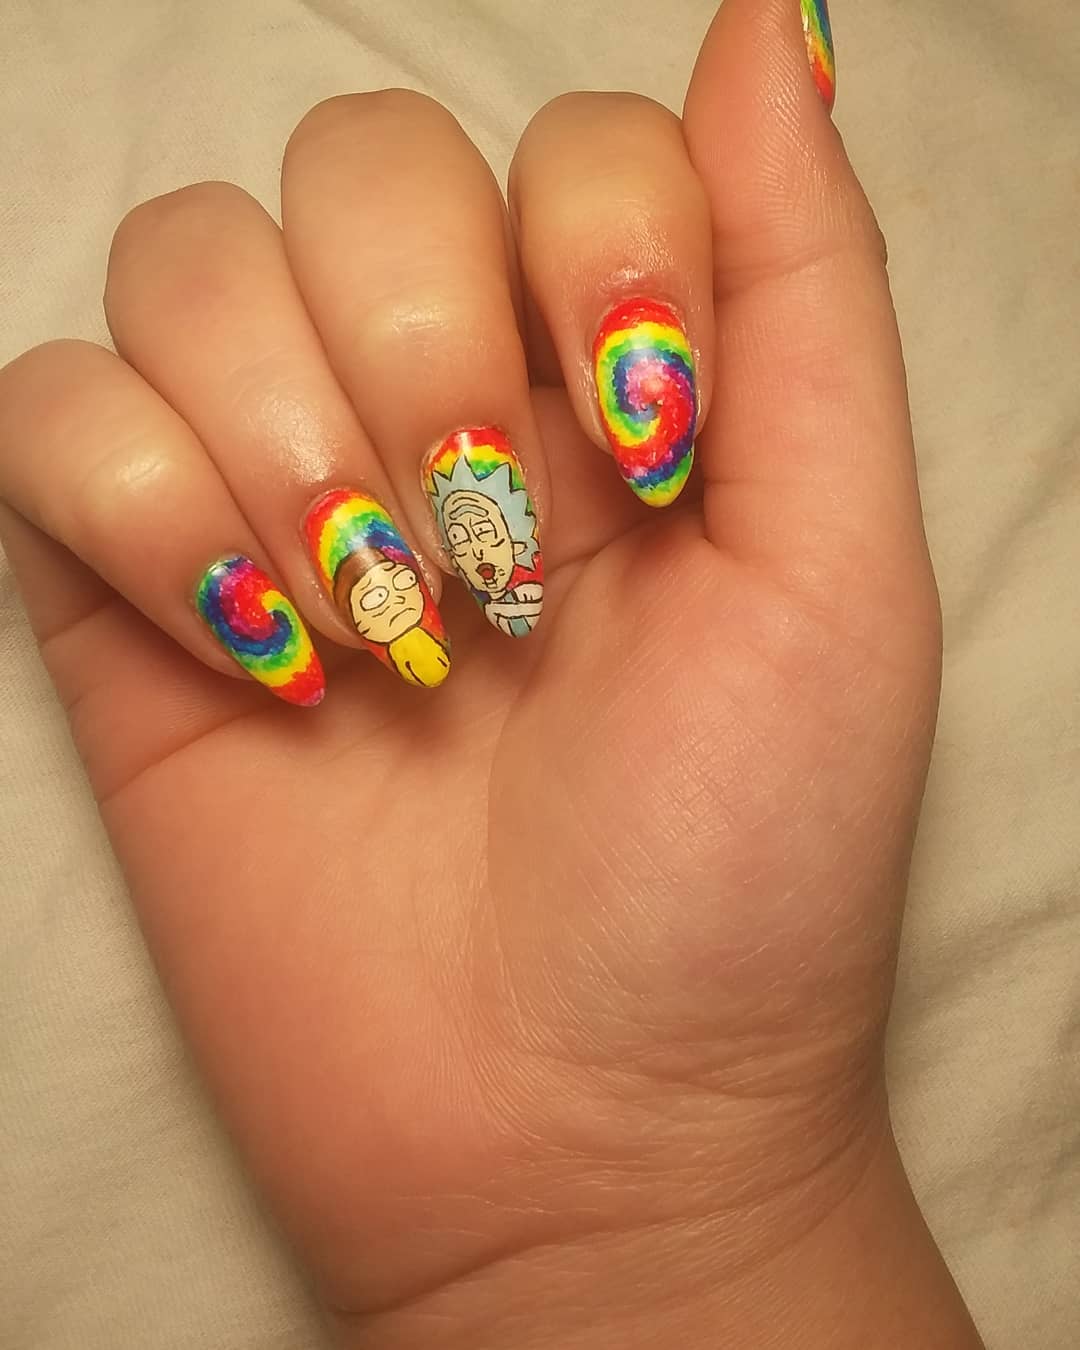 Pointed Nails with Cartoon Designs